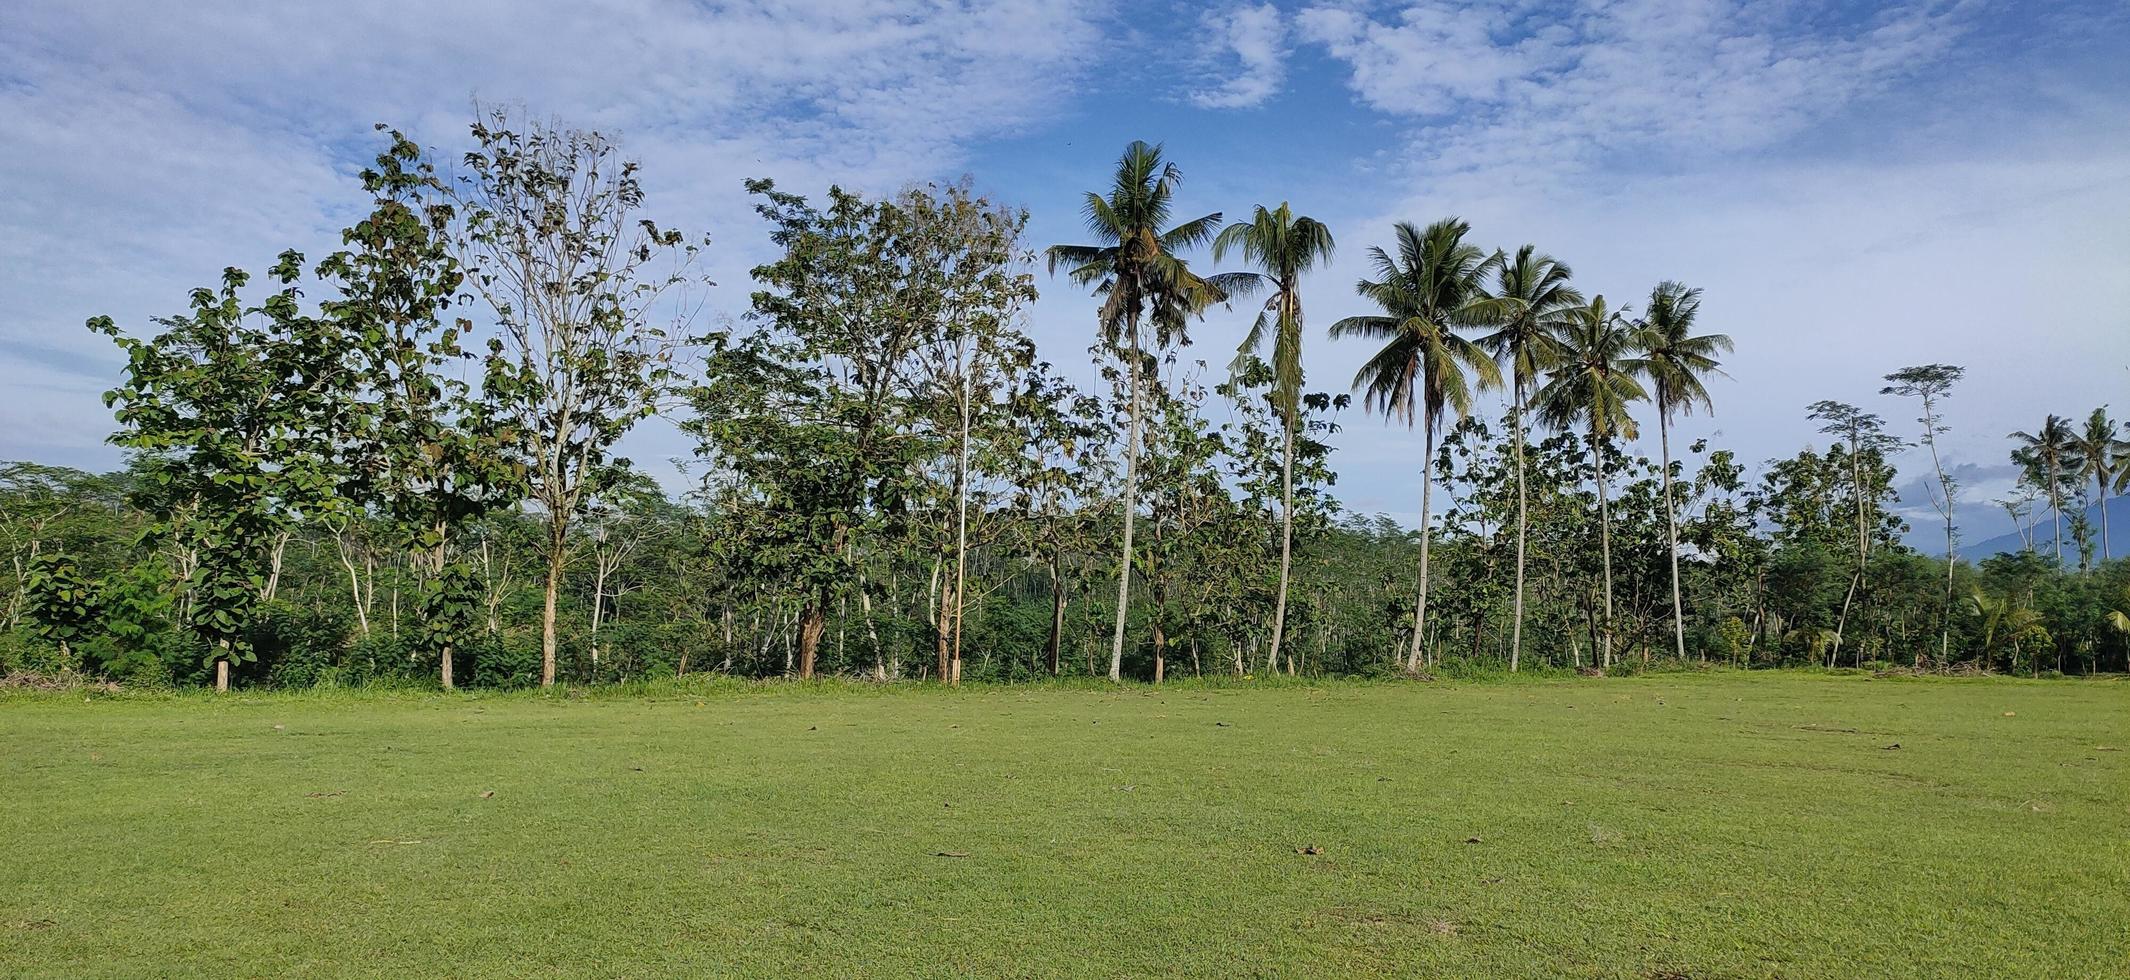 View of tall coconut trees and sengon trees on the edge of the field, under a blue sky with pure white clouds photo